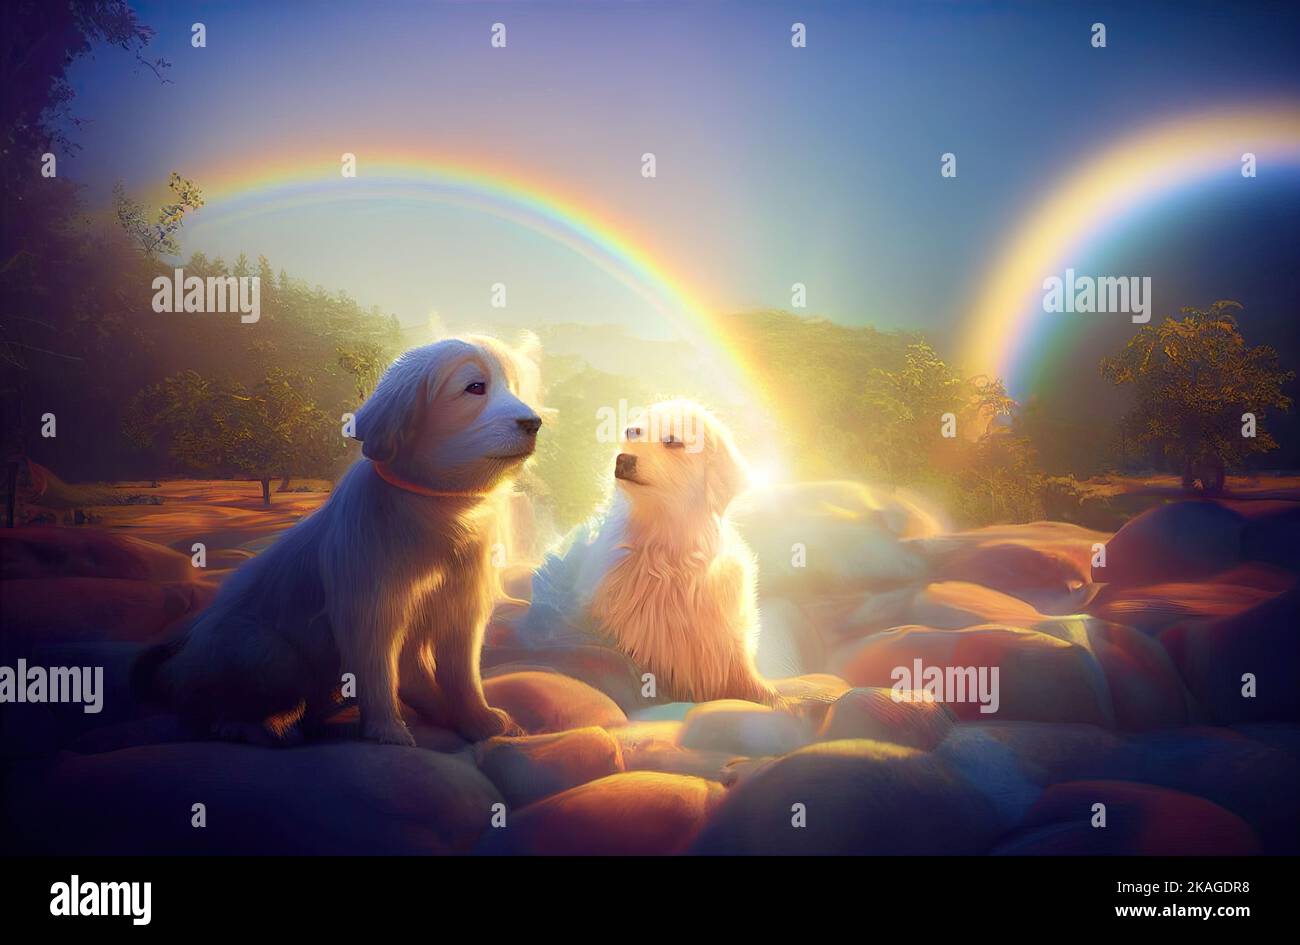 An idyllic pet paradise, teeming with playmates and filled with rainbow-hued bridges, ethereal clouds, and cheerful sunshine. Dogs and cats are Stock Photo